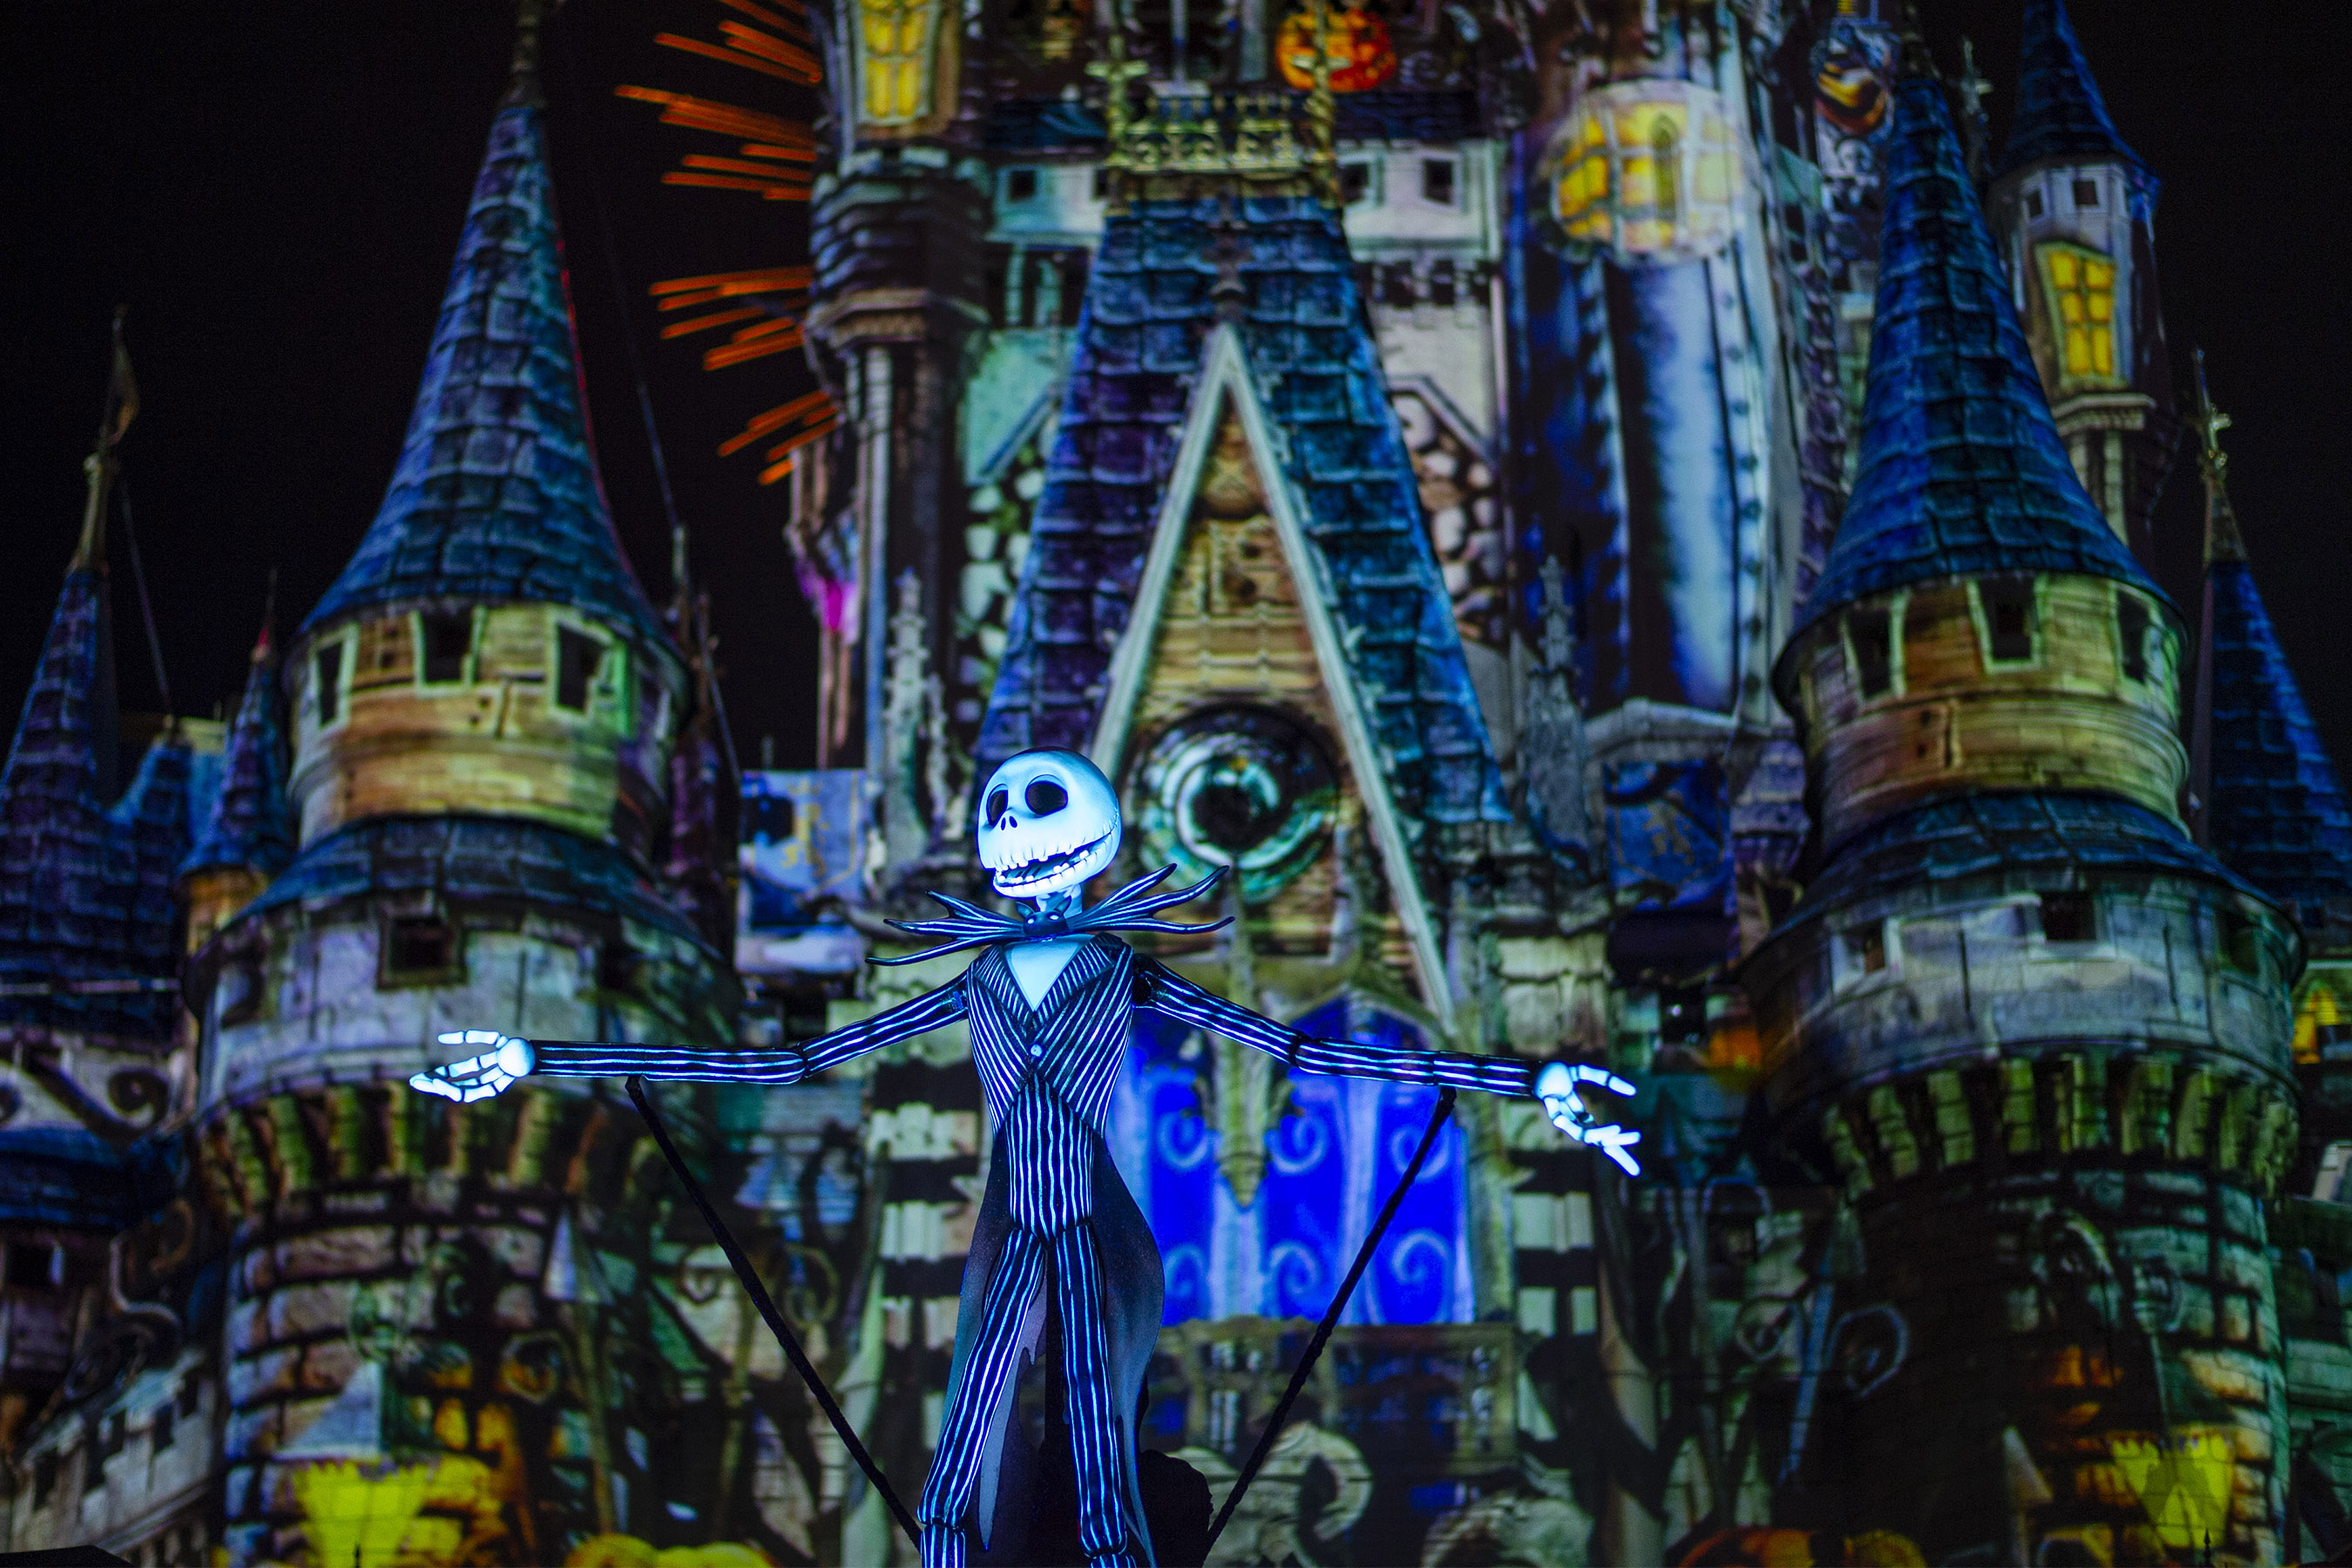 VIDEO - First look at Disney's Not So Spooky Spectacular coming to this